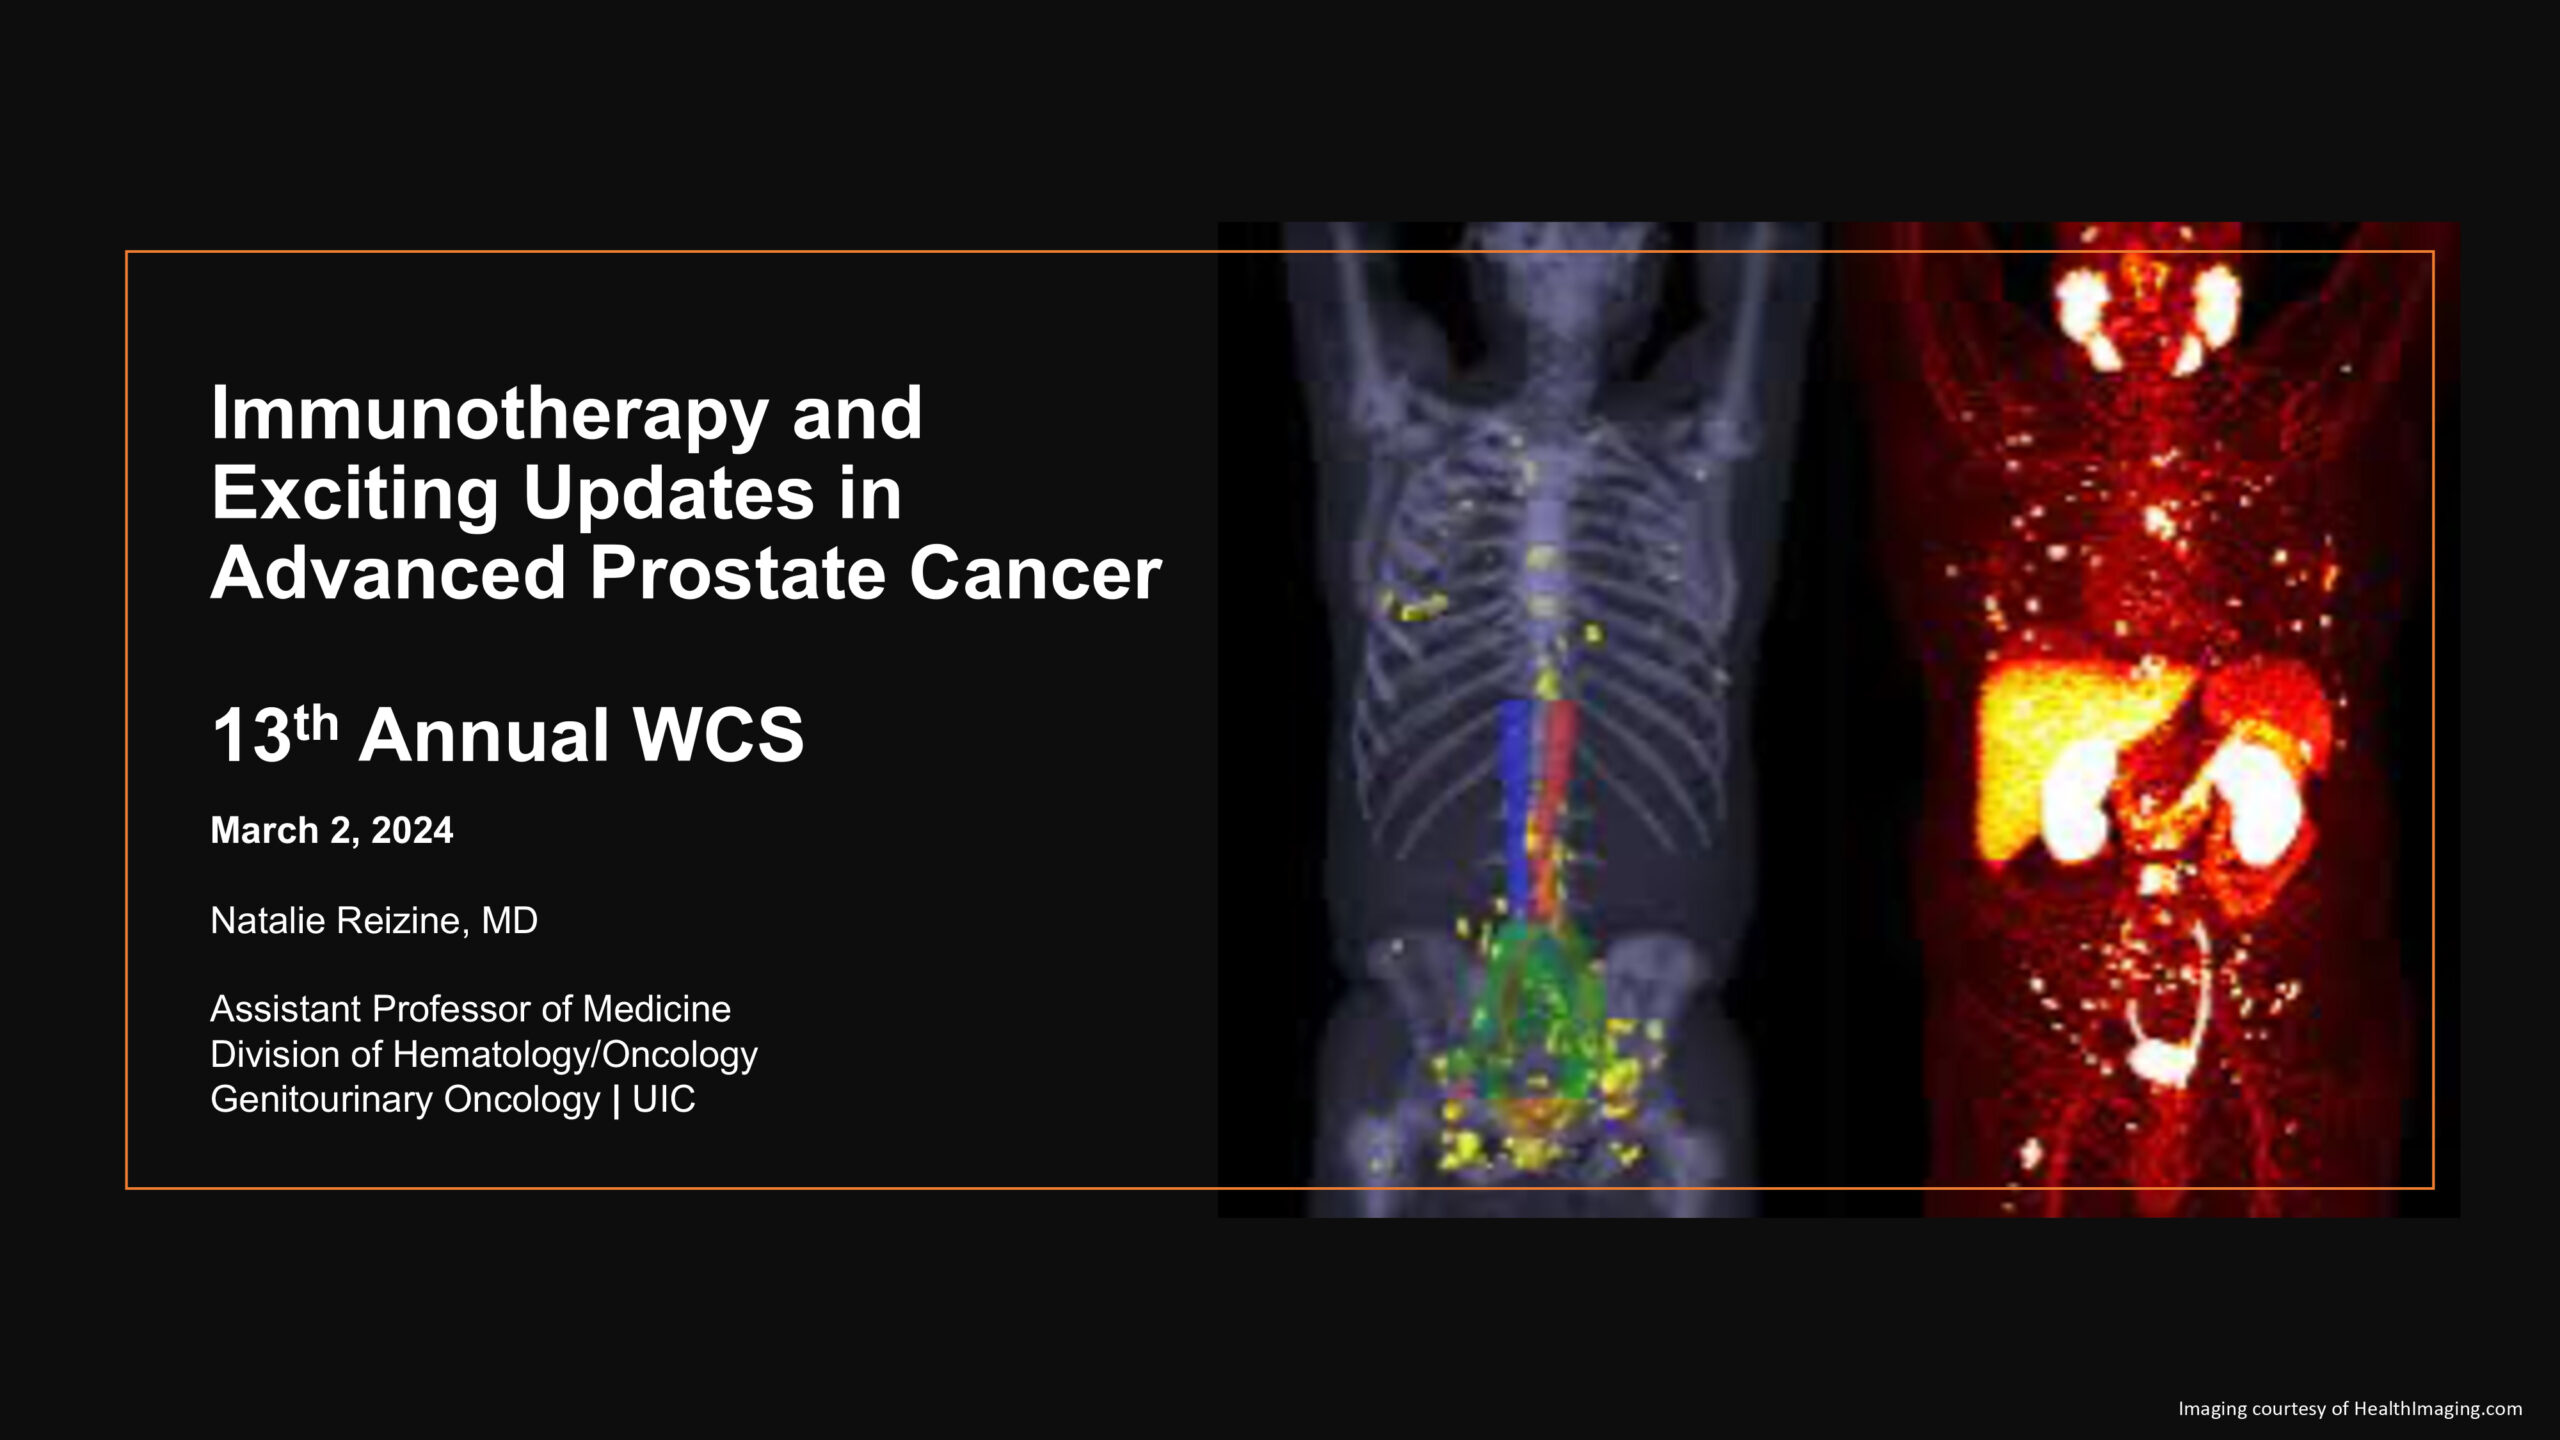 Immunotherapy and Exciting Updates in Advanced Prostate Cancer